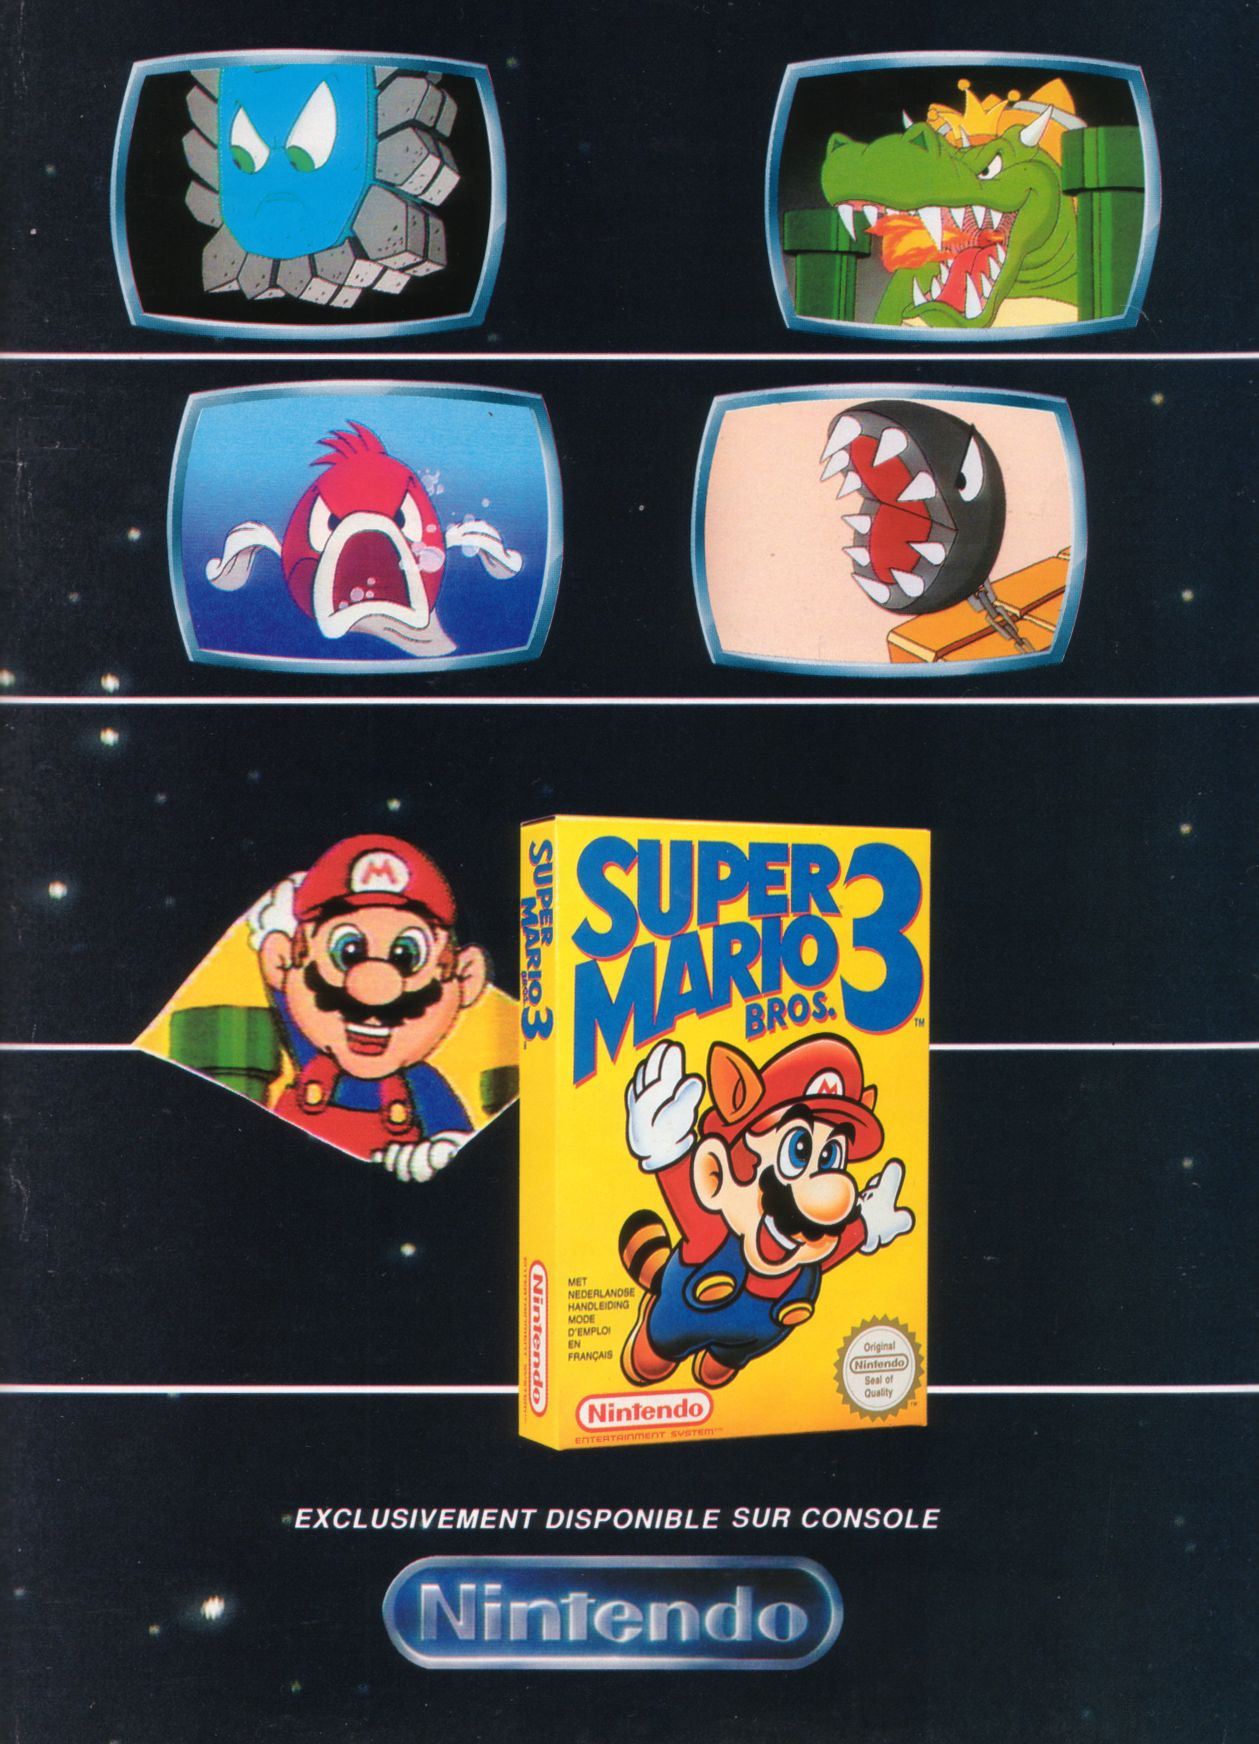 Kuribo’s Shoe for life. Super Mario Bros. 3 was the biggest release on the Nintendo Entertainment System, selling over 18 million copies. It also features Kuribo’s Shoe, which is the […]